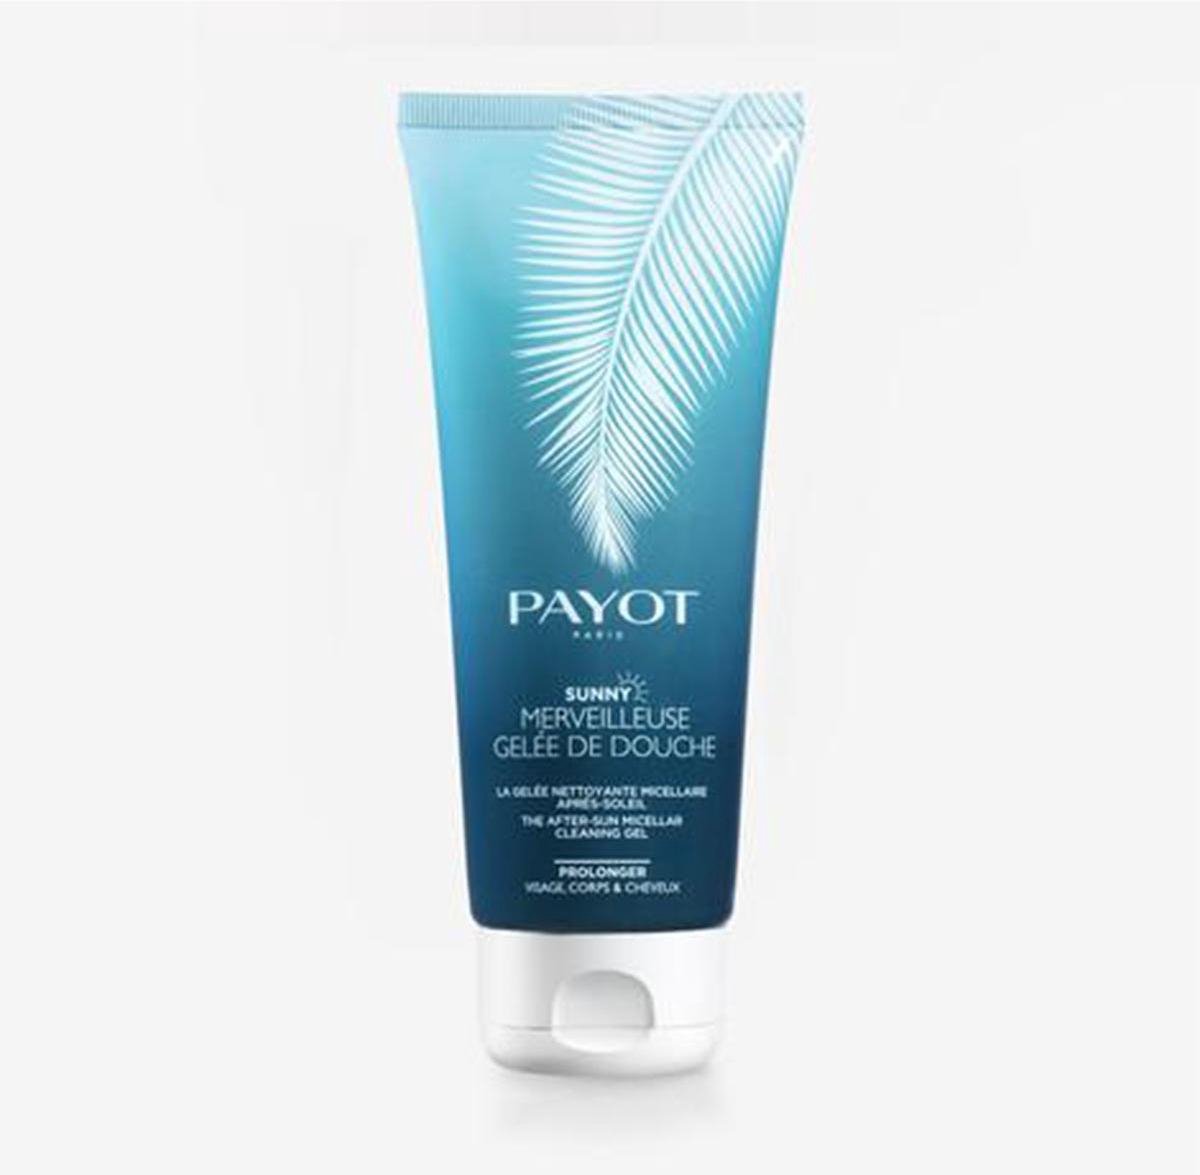 Payot - Sunny The After